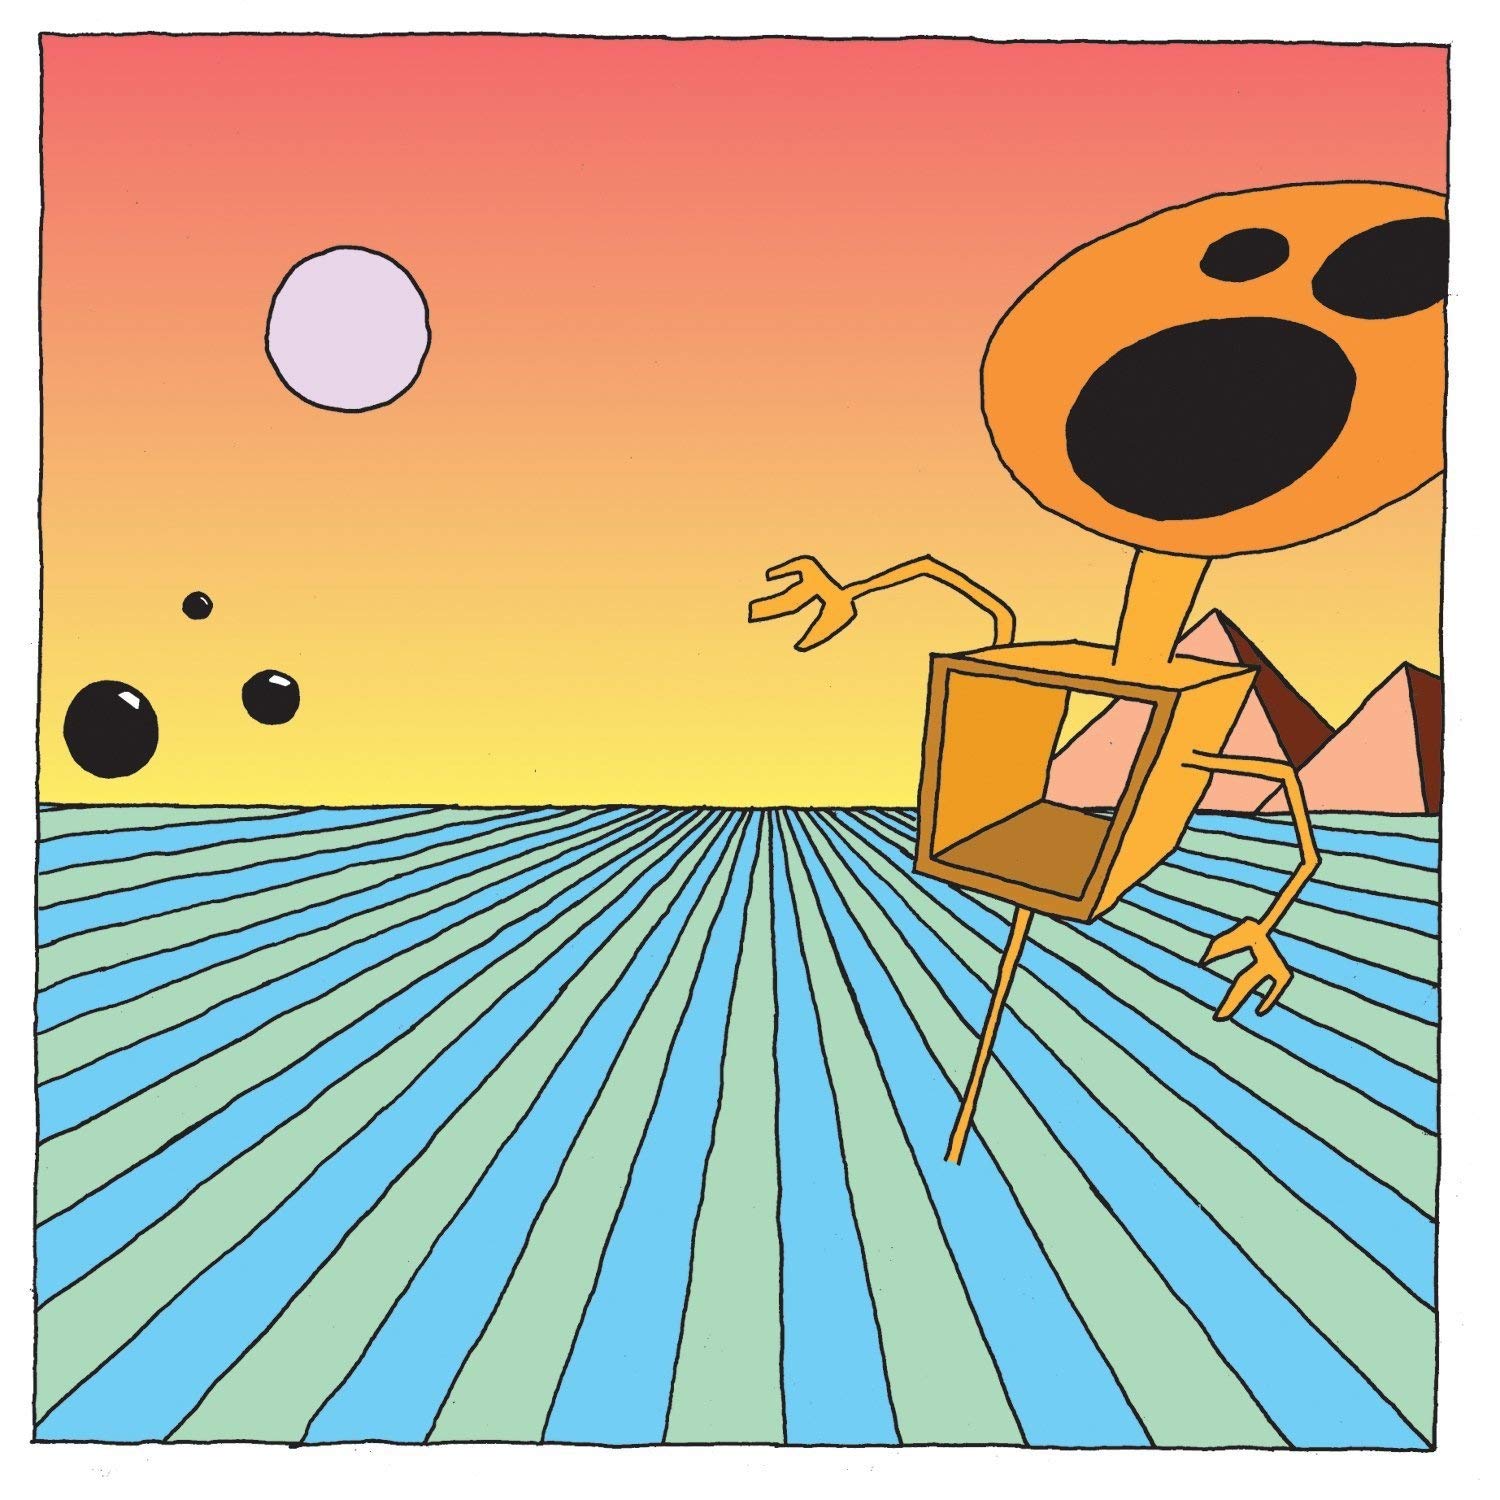 Album cover for Emergency & I - The Dismemberment Plan